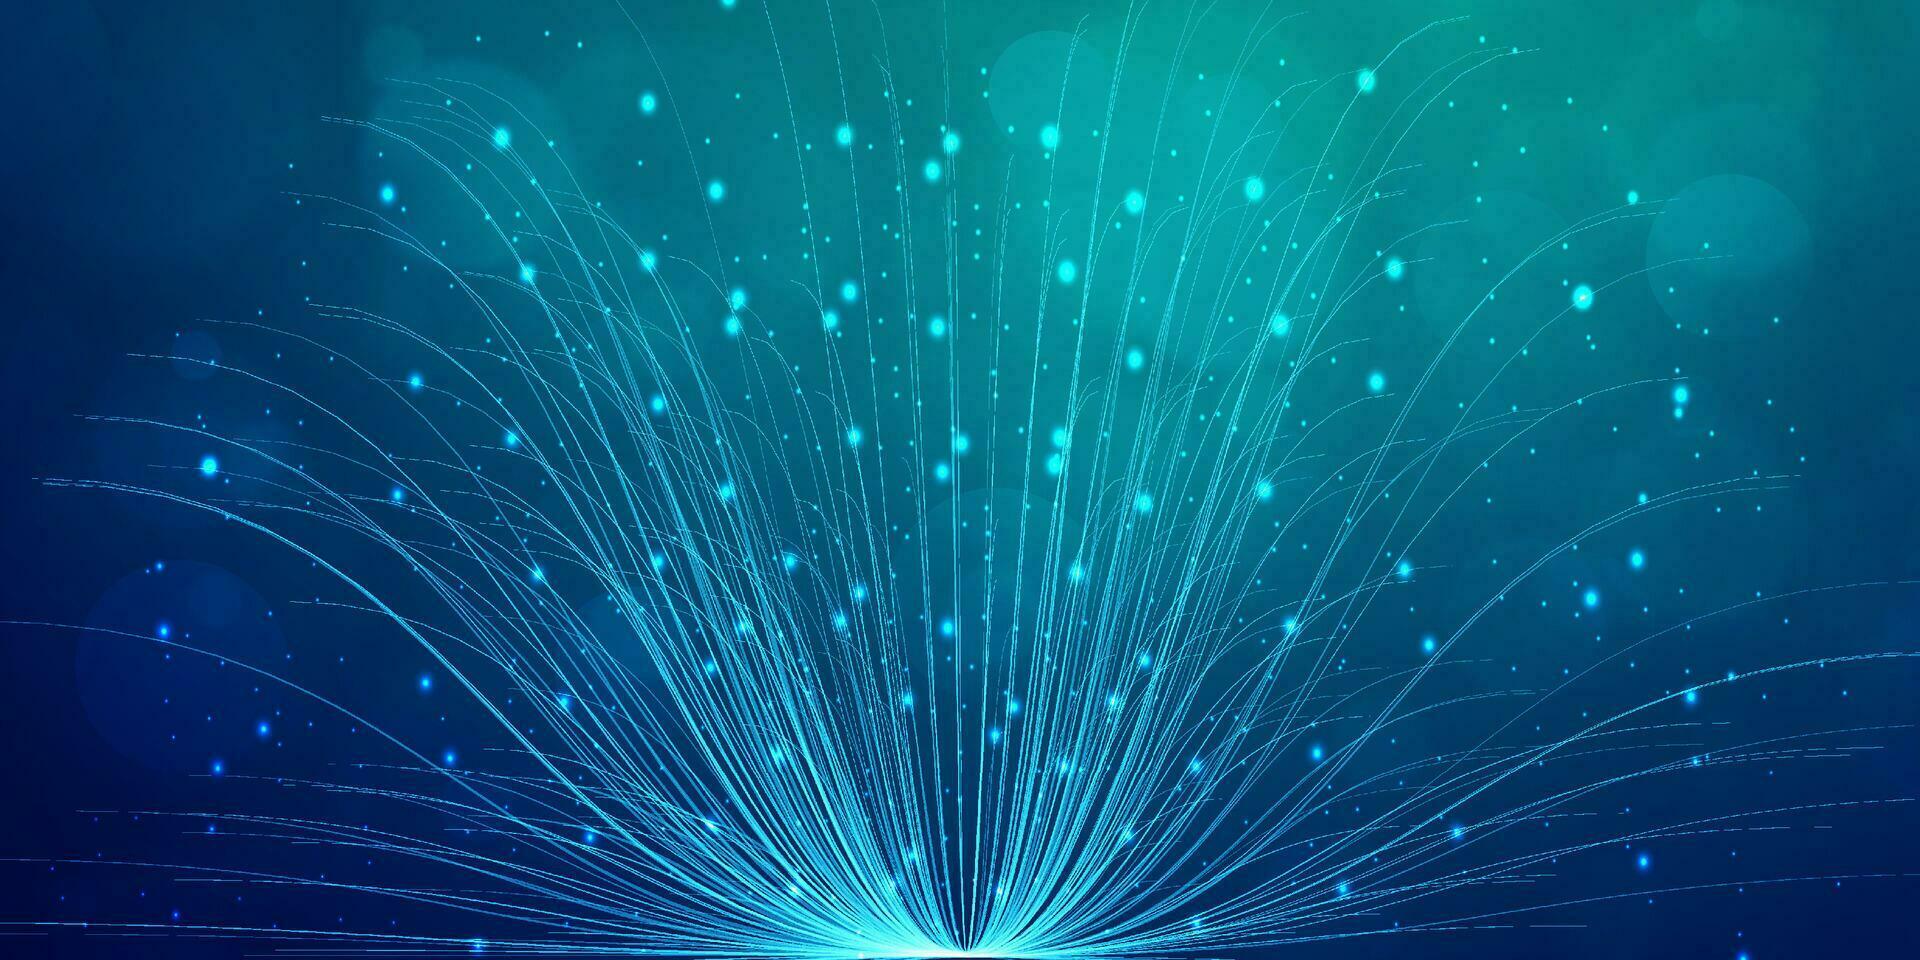 Digital technology Ai big data blue green background, cyber nano information, abstract communication, innovation future tech data, internet network speed connection lines dots, illustration vector 3d